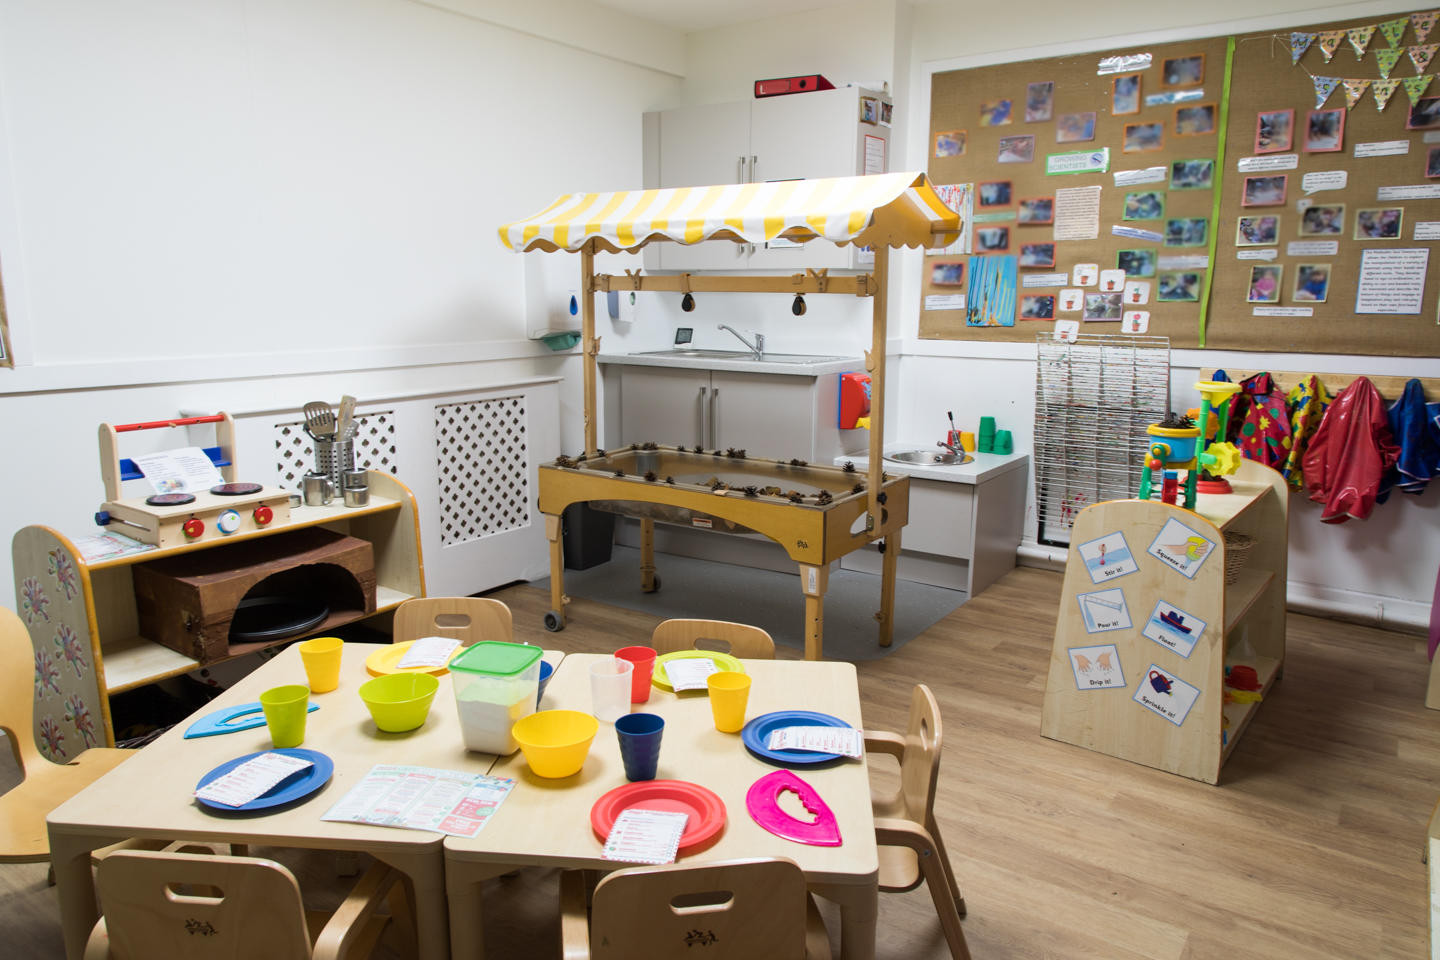 Images Bright Horizons Wavendon Day Nursery and Preschool